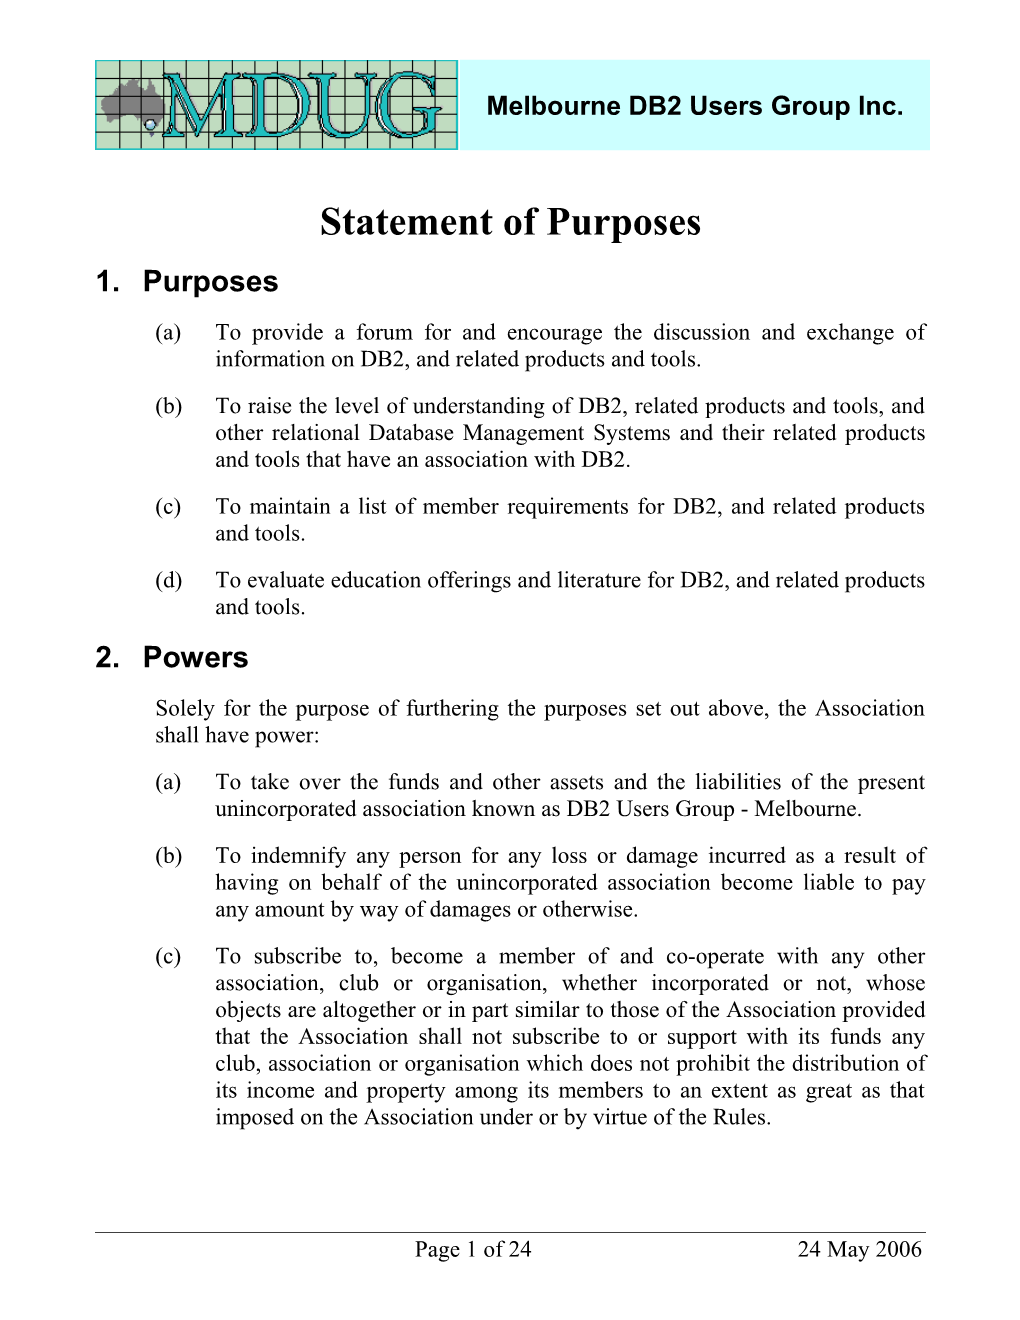 Statement of Purposes and Rules of the Association